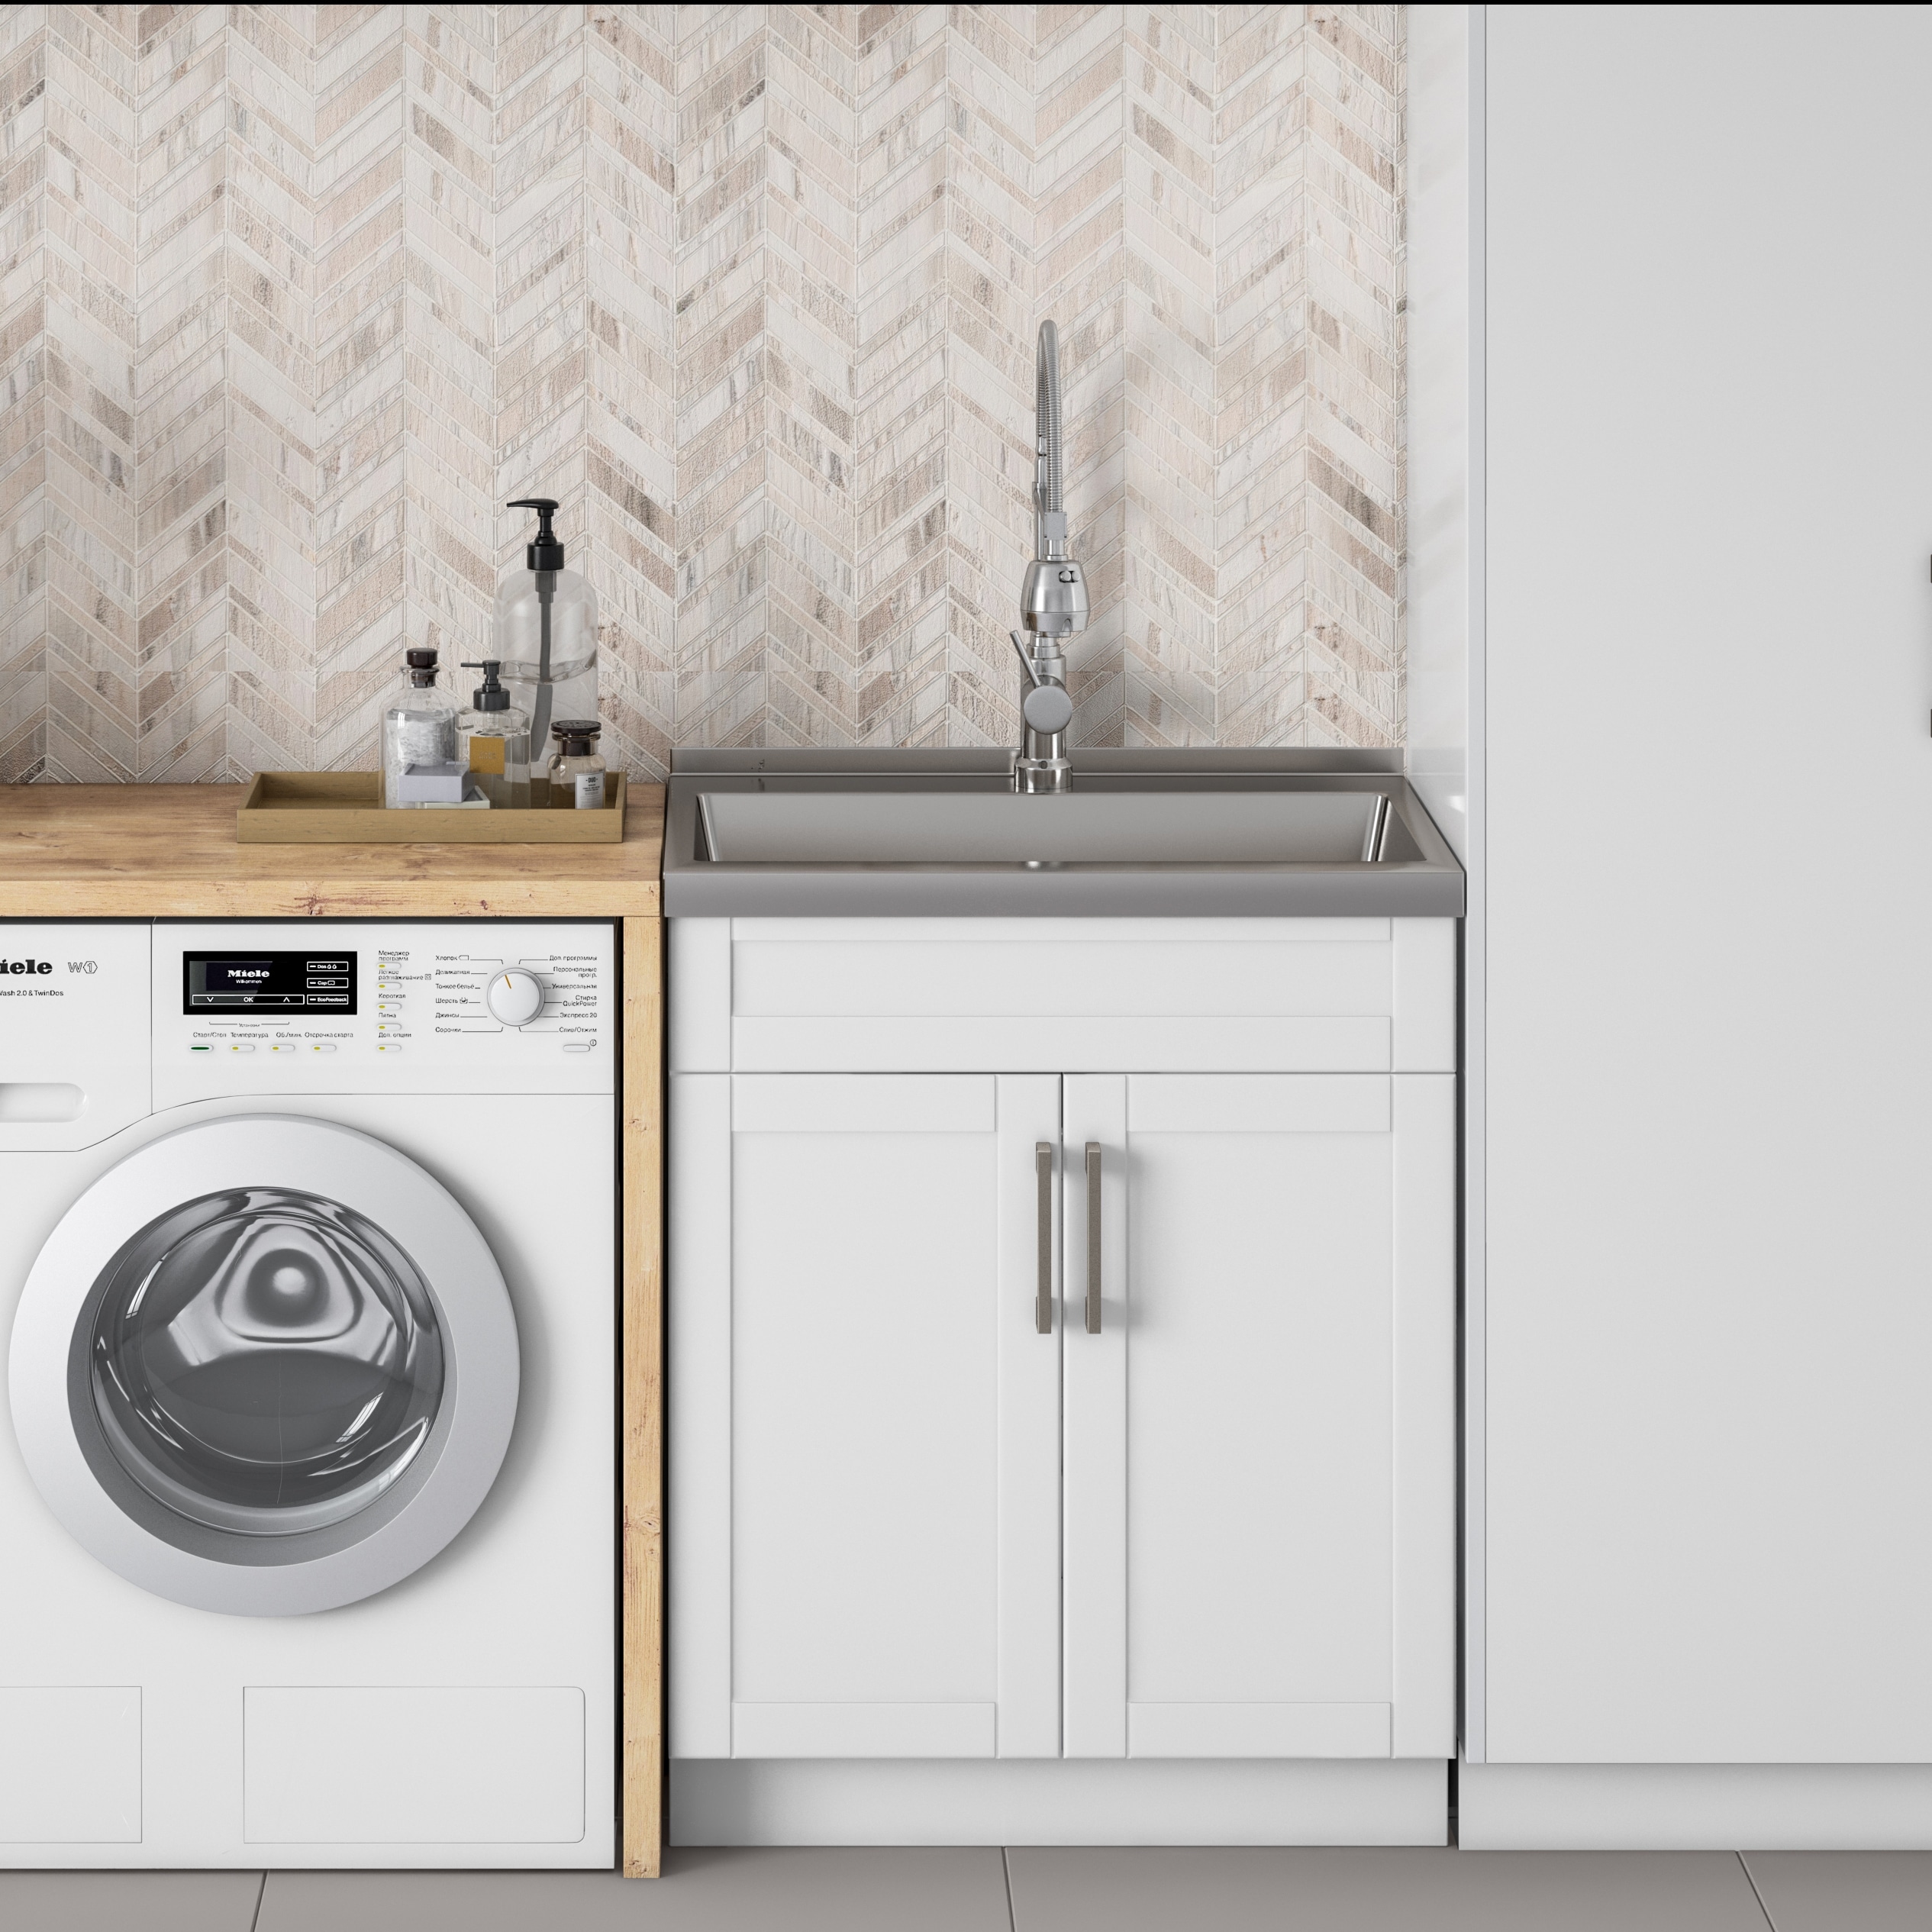 https://ak1.ostkcdn.com/images/products/is/images/direct/faea00e92ed79fda2525dec10358c37f57f64bae/WYNDENHALL-Hartland-Deluxe-Laundry-Cabinet-with-Faucet-and-Stainless-Steel-Sink.jpg